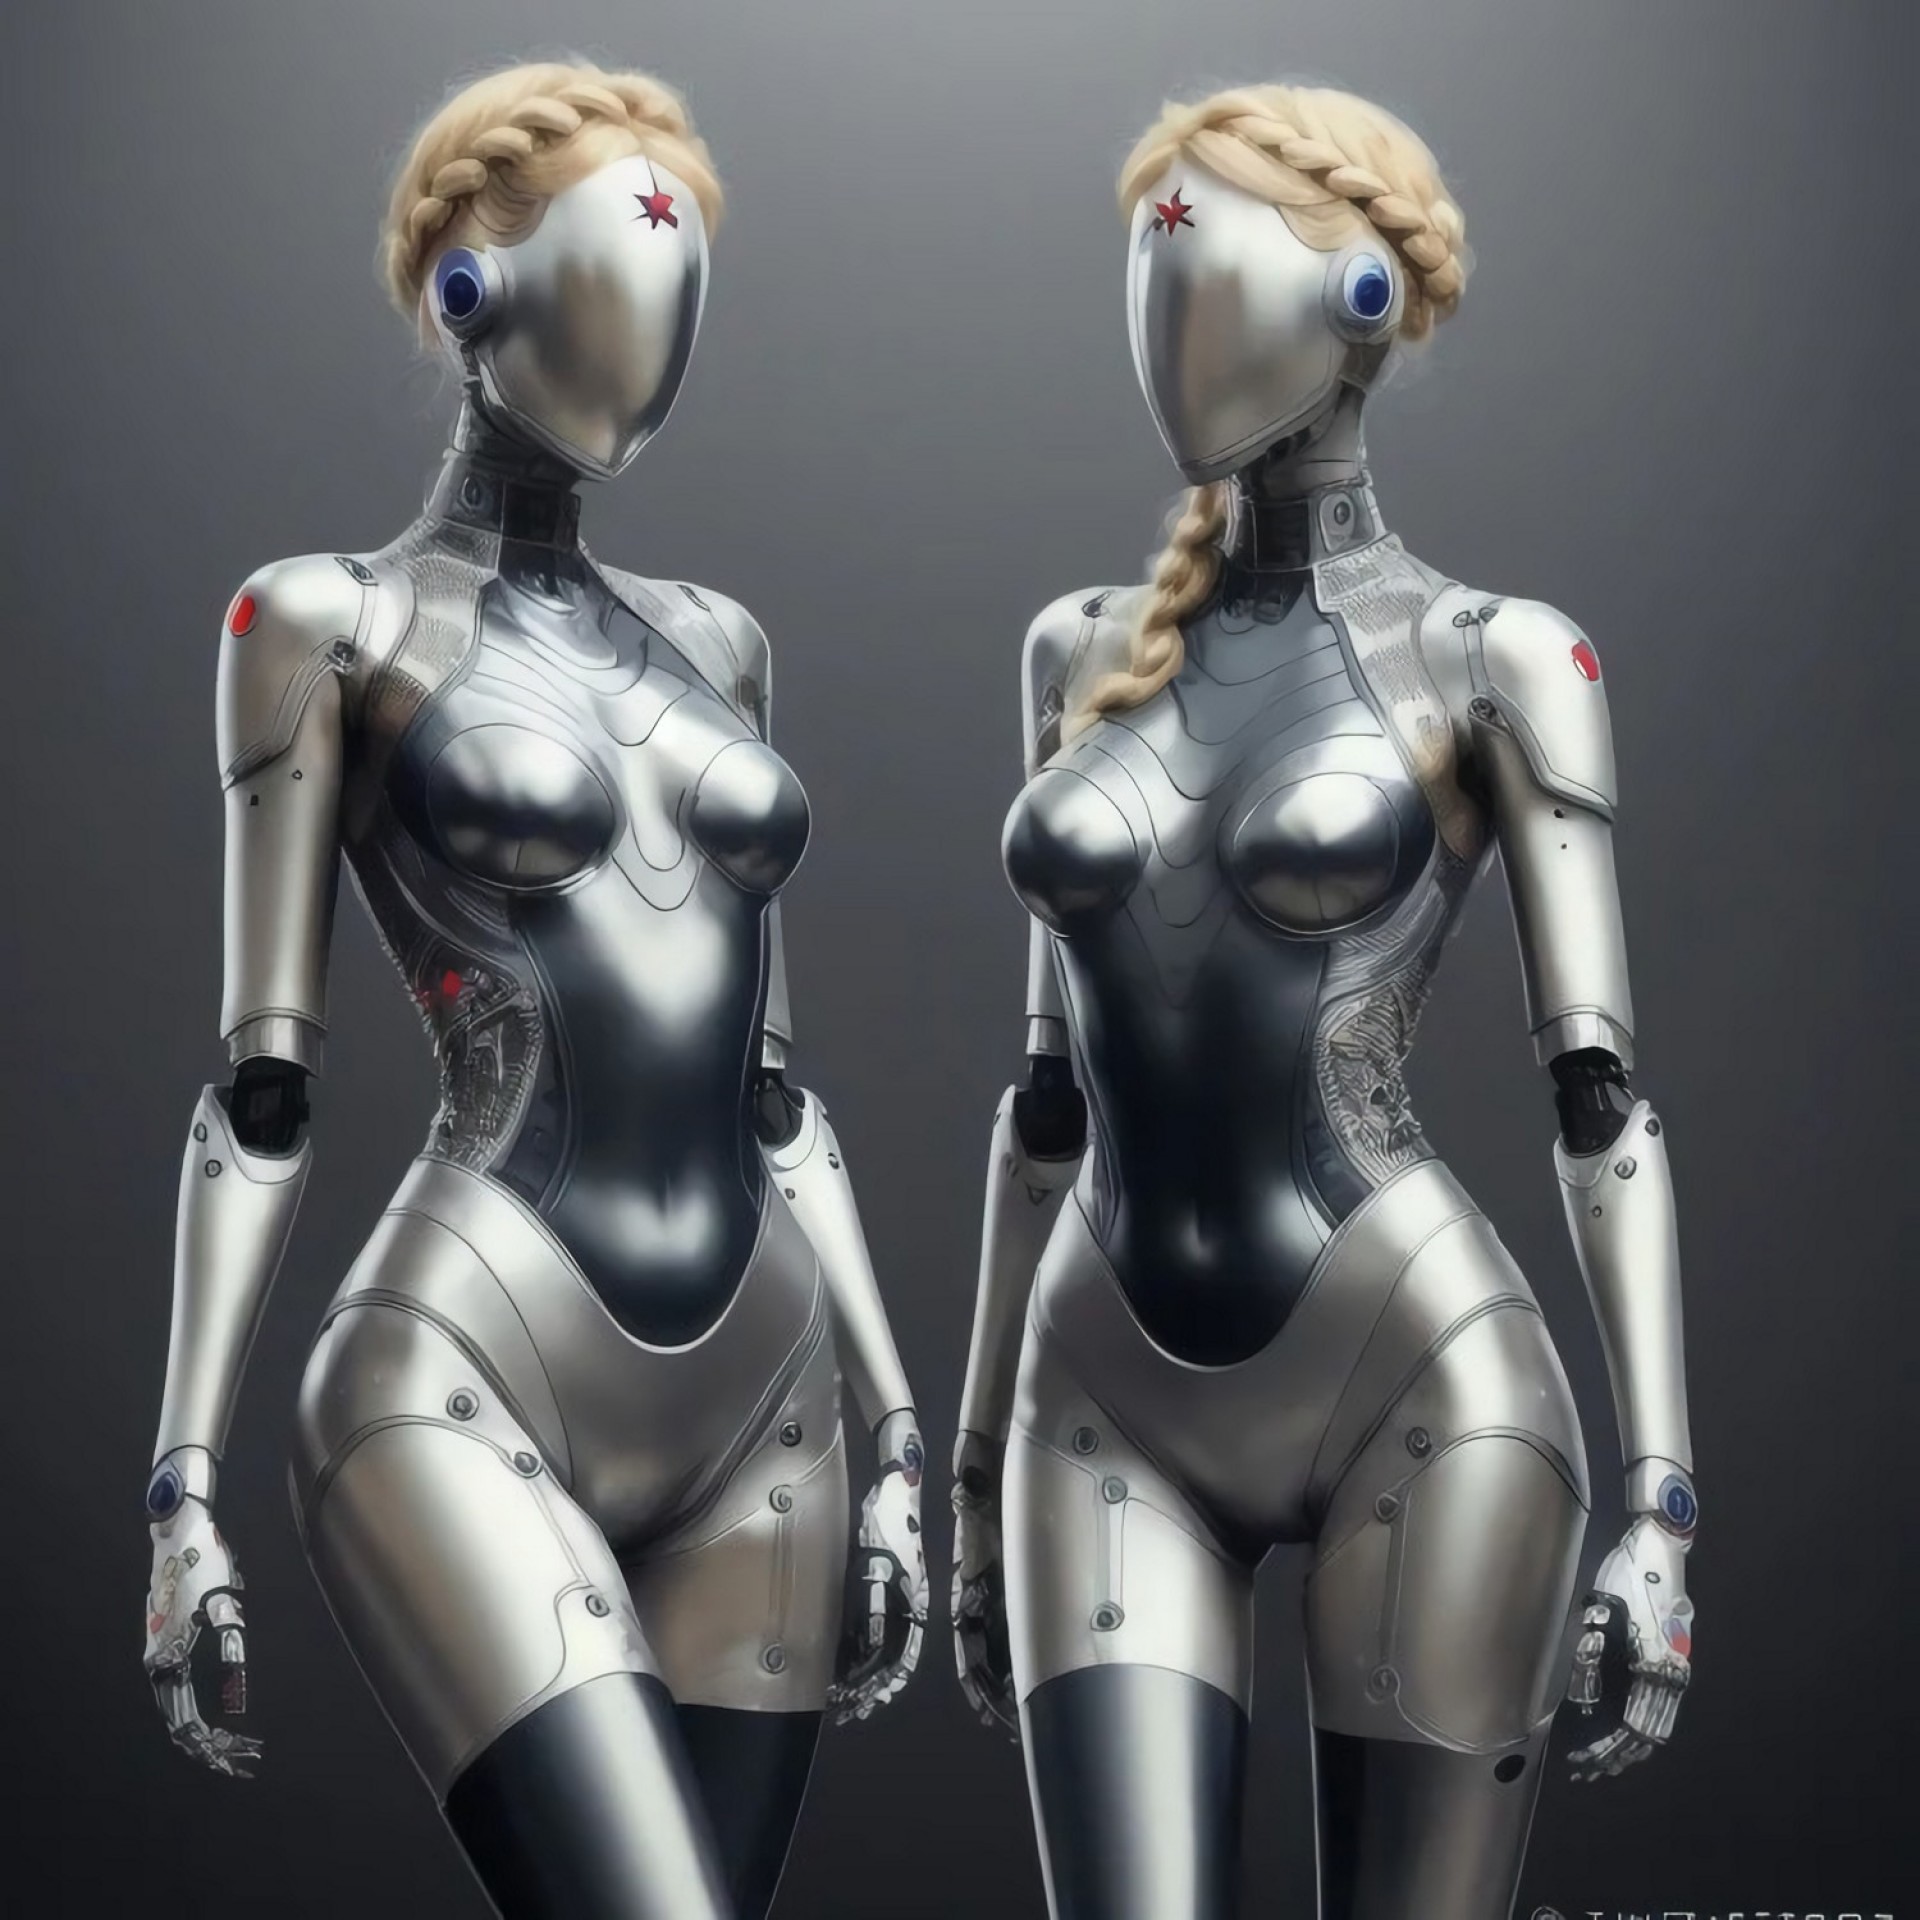 Sexy Space Babes: Alienware Girls That Will Make Your Heart Race